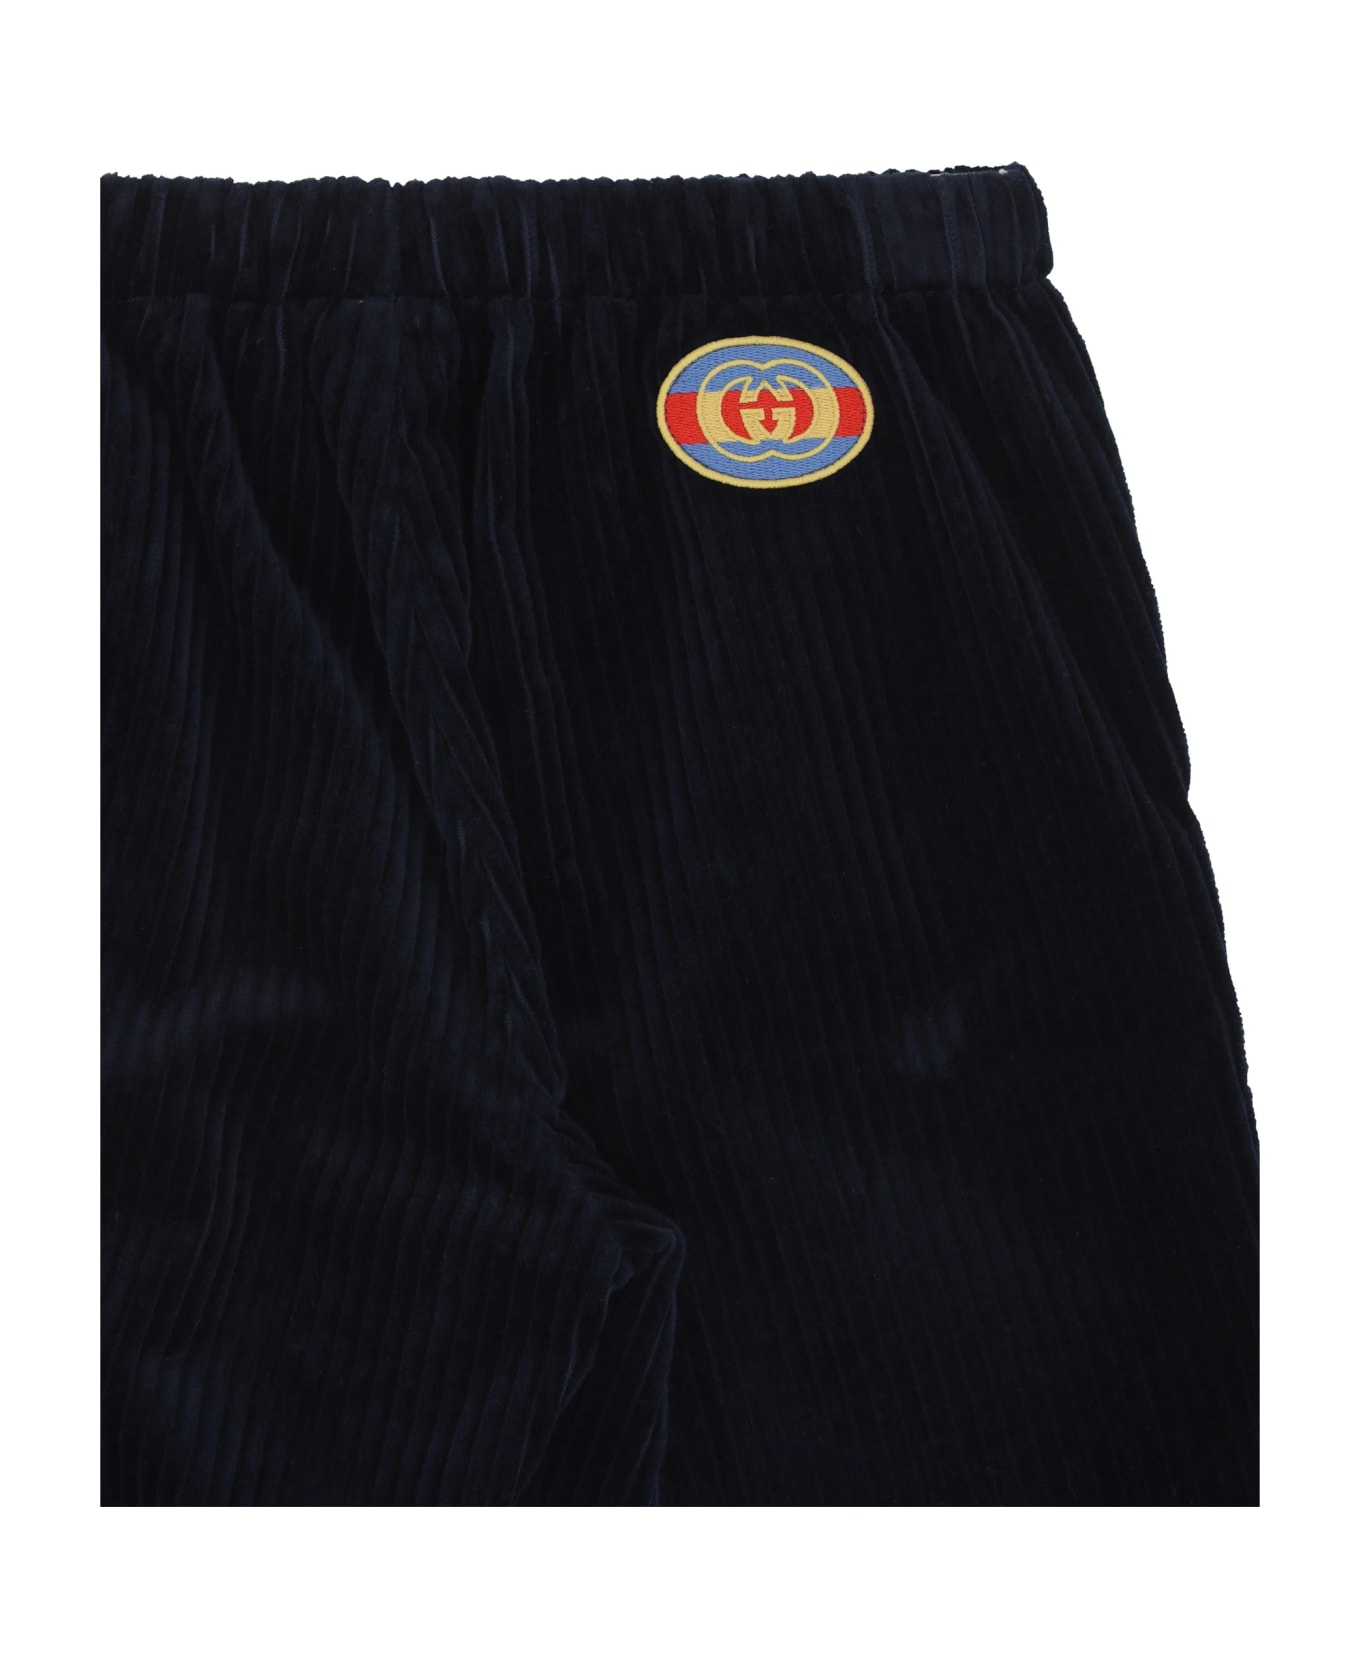 Gucci Pants For Boy - Navy ボトムス